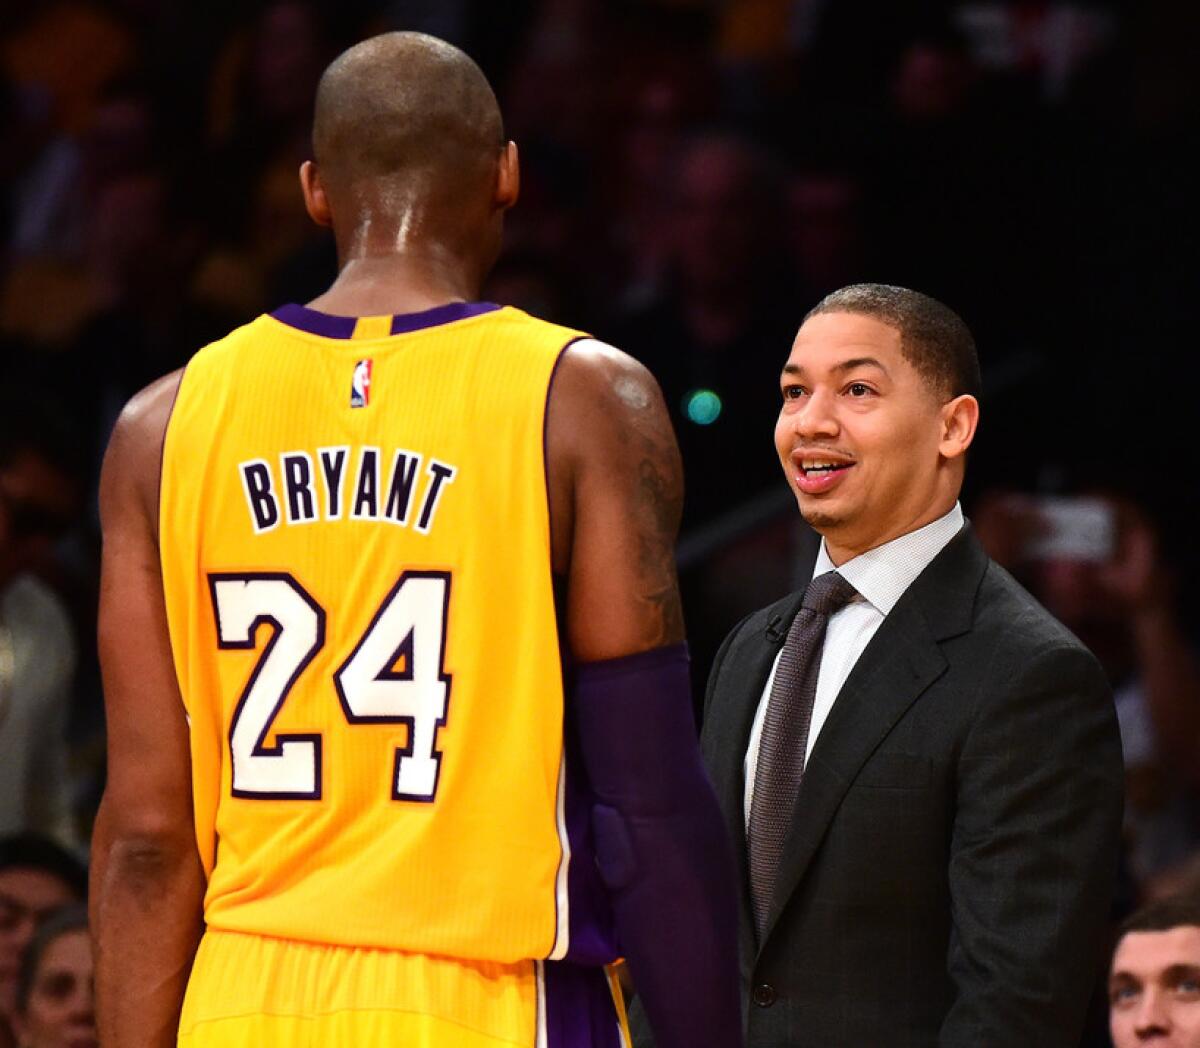 Lakers star Kobe Bryant and Cavaliers coach Tyronn Lue exchange greetings before a game in 2016.